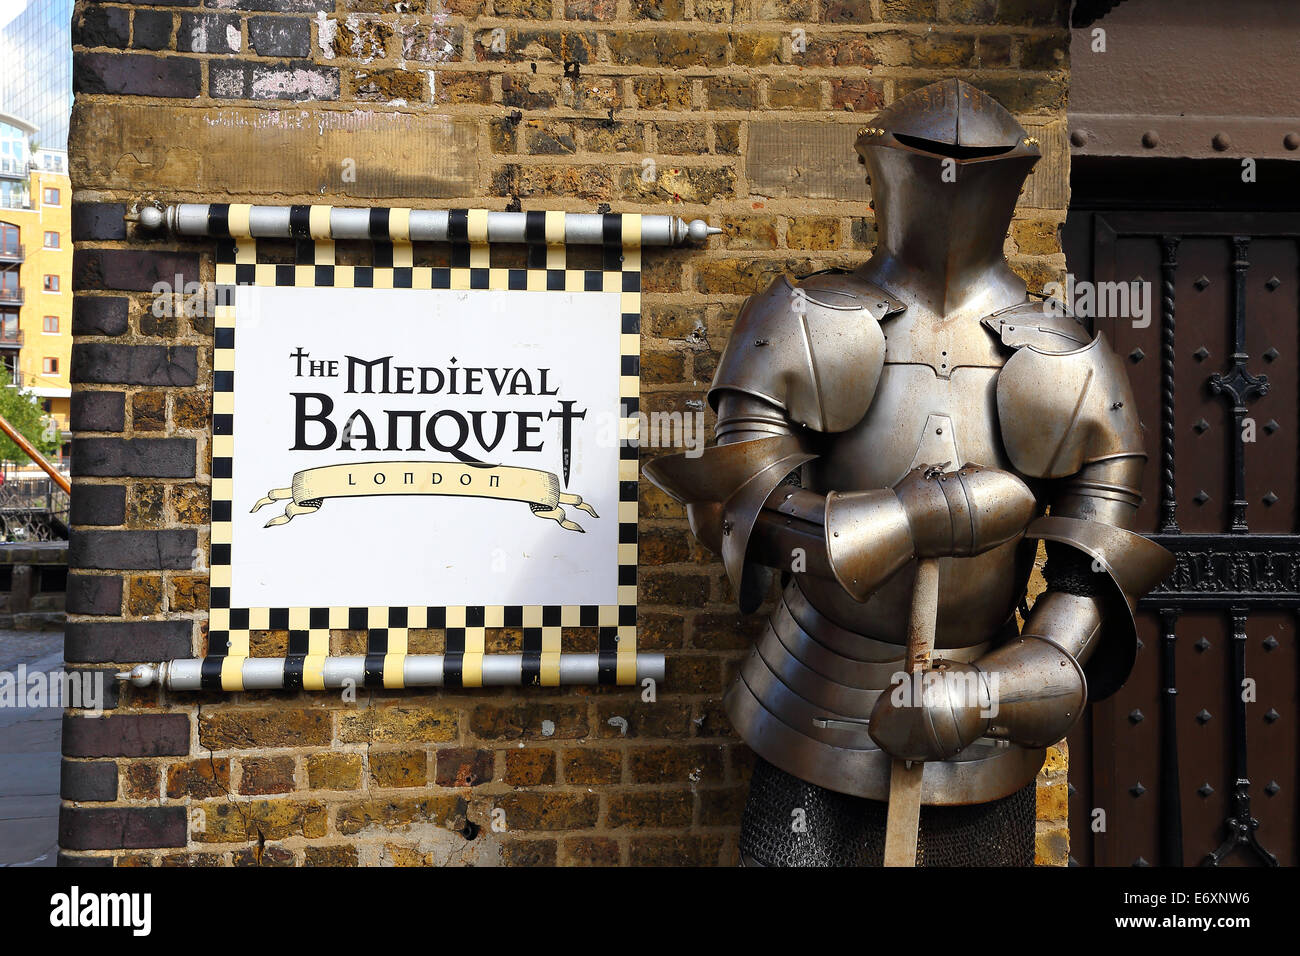 The Medieval Banquet entrance, London, England Stock Photo